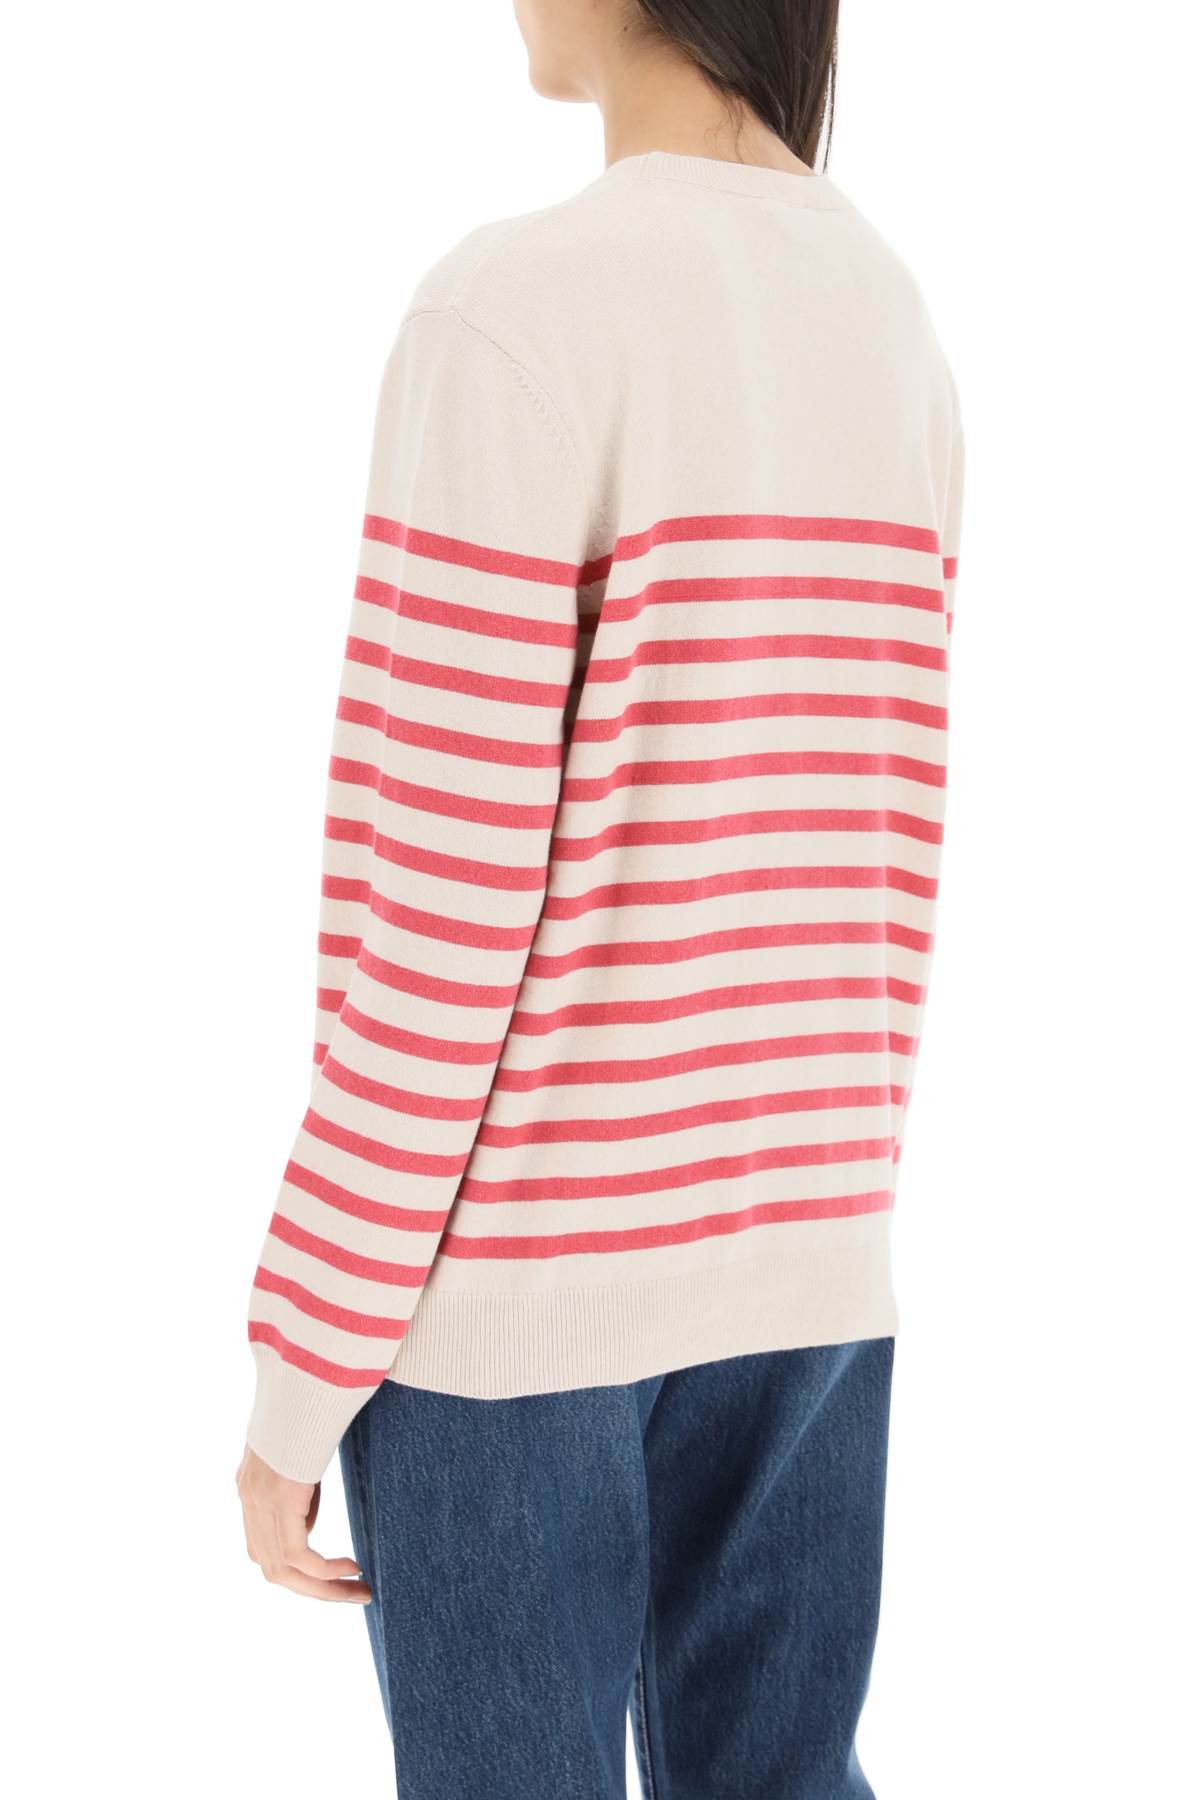 Shop Apc Phoebe Striped Cashmere And Cotton Sweater In Blanc Casse (beige)